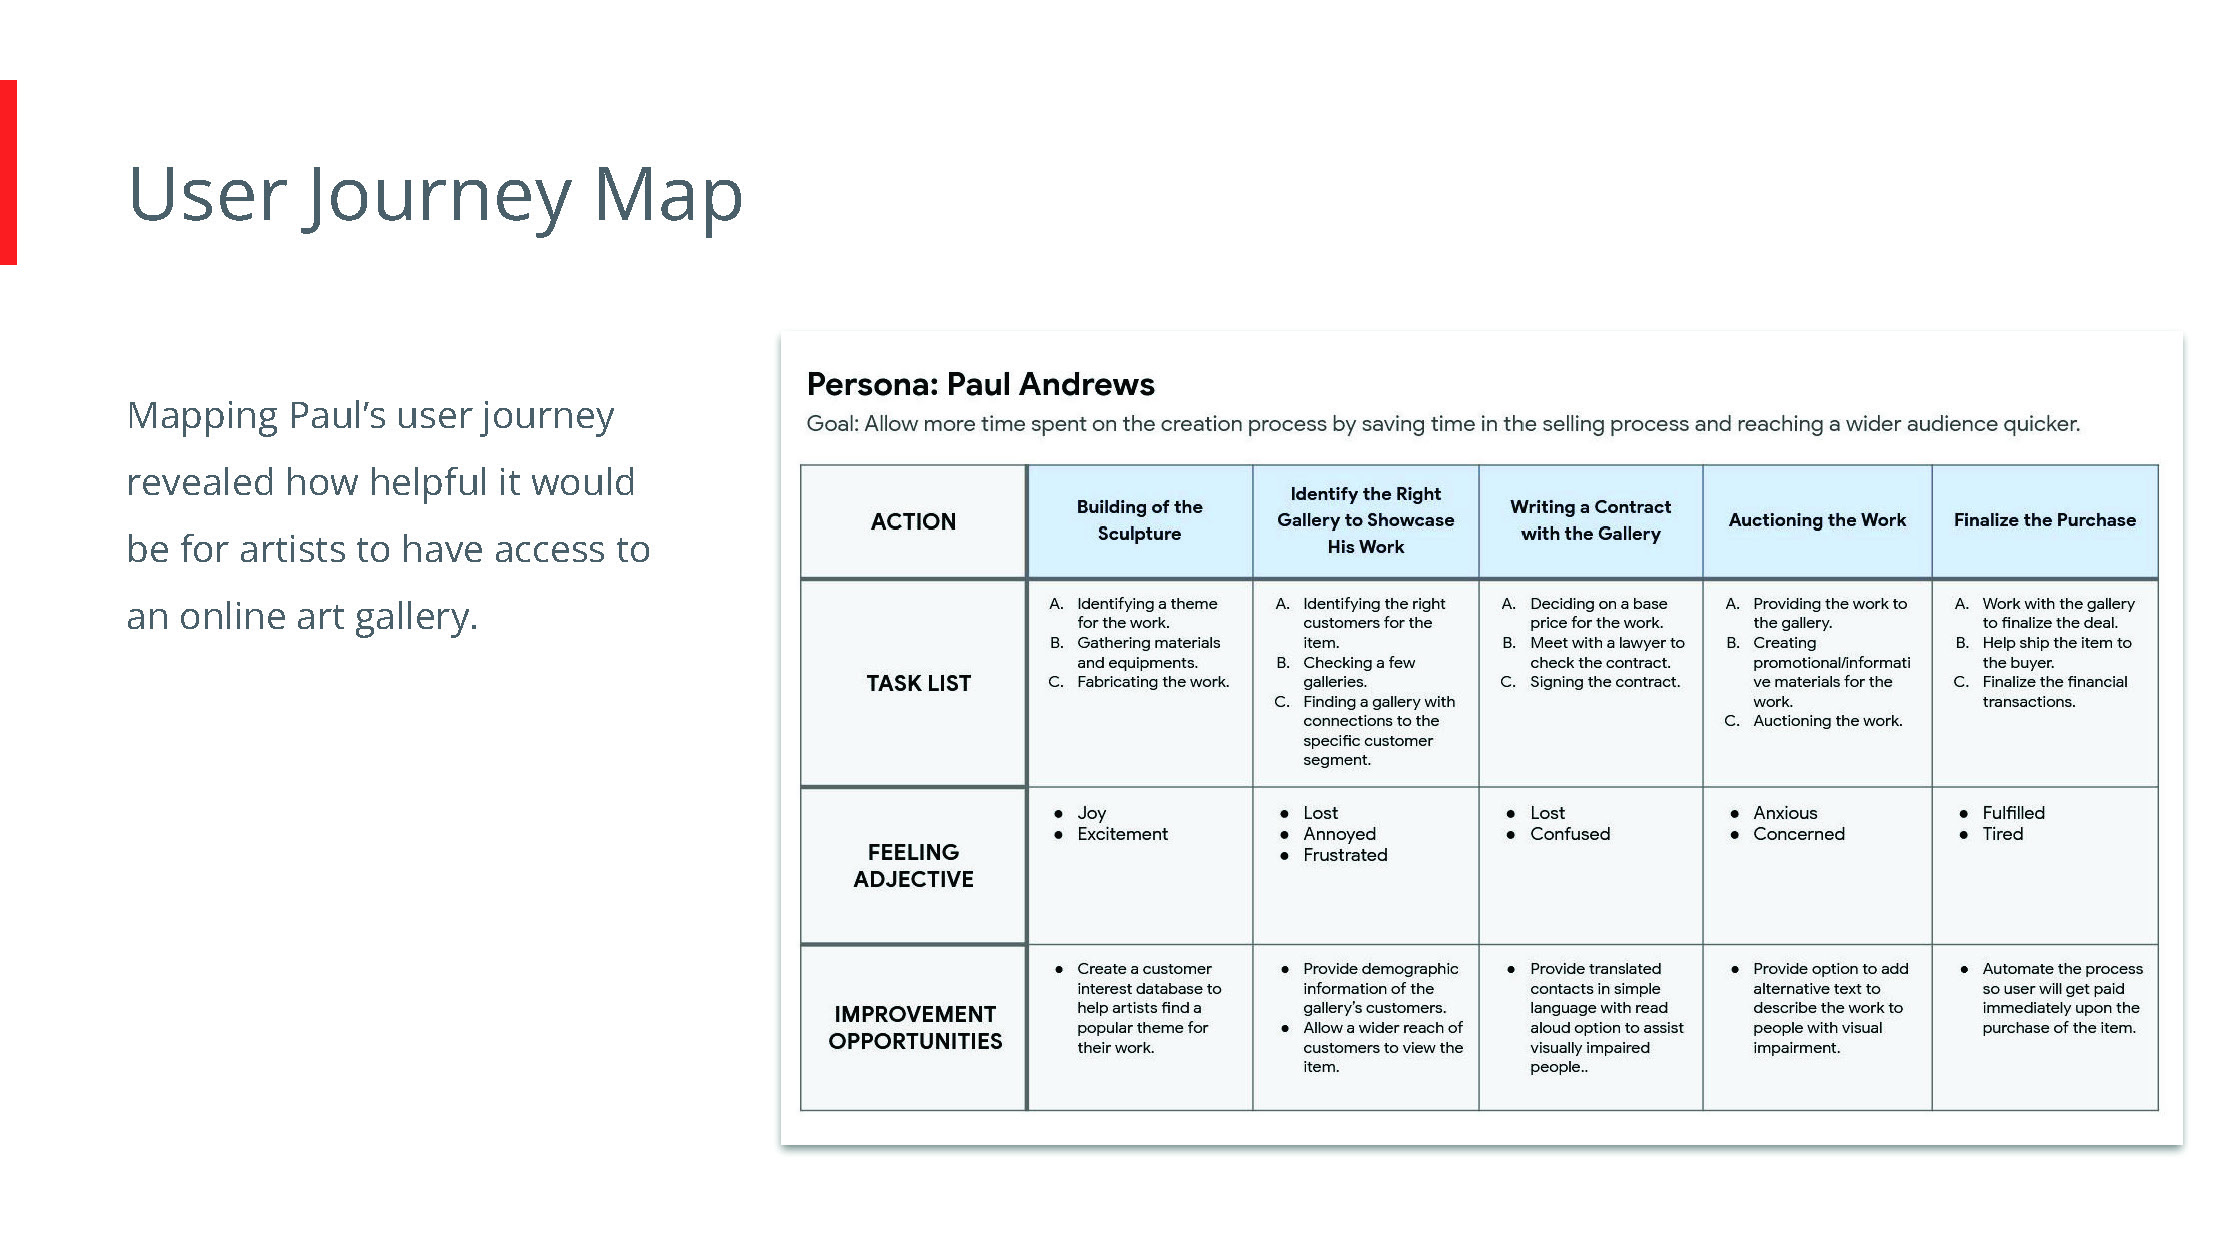 ARTY - Understanding the Users - Sample User Journey Map